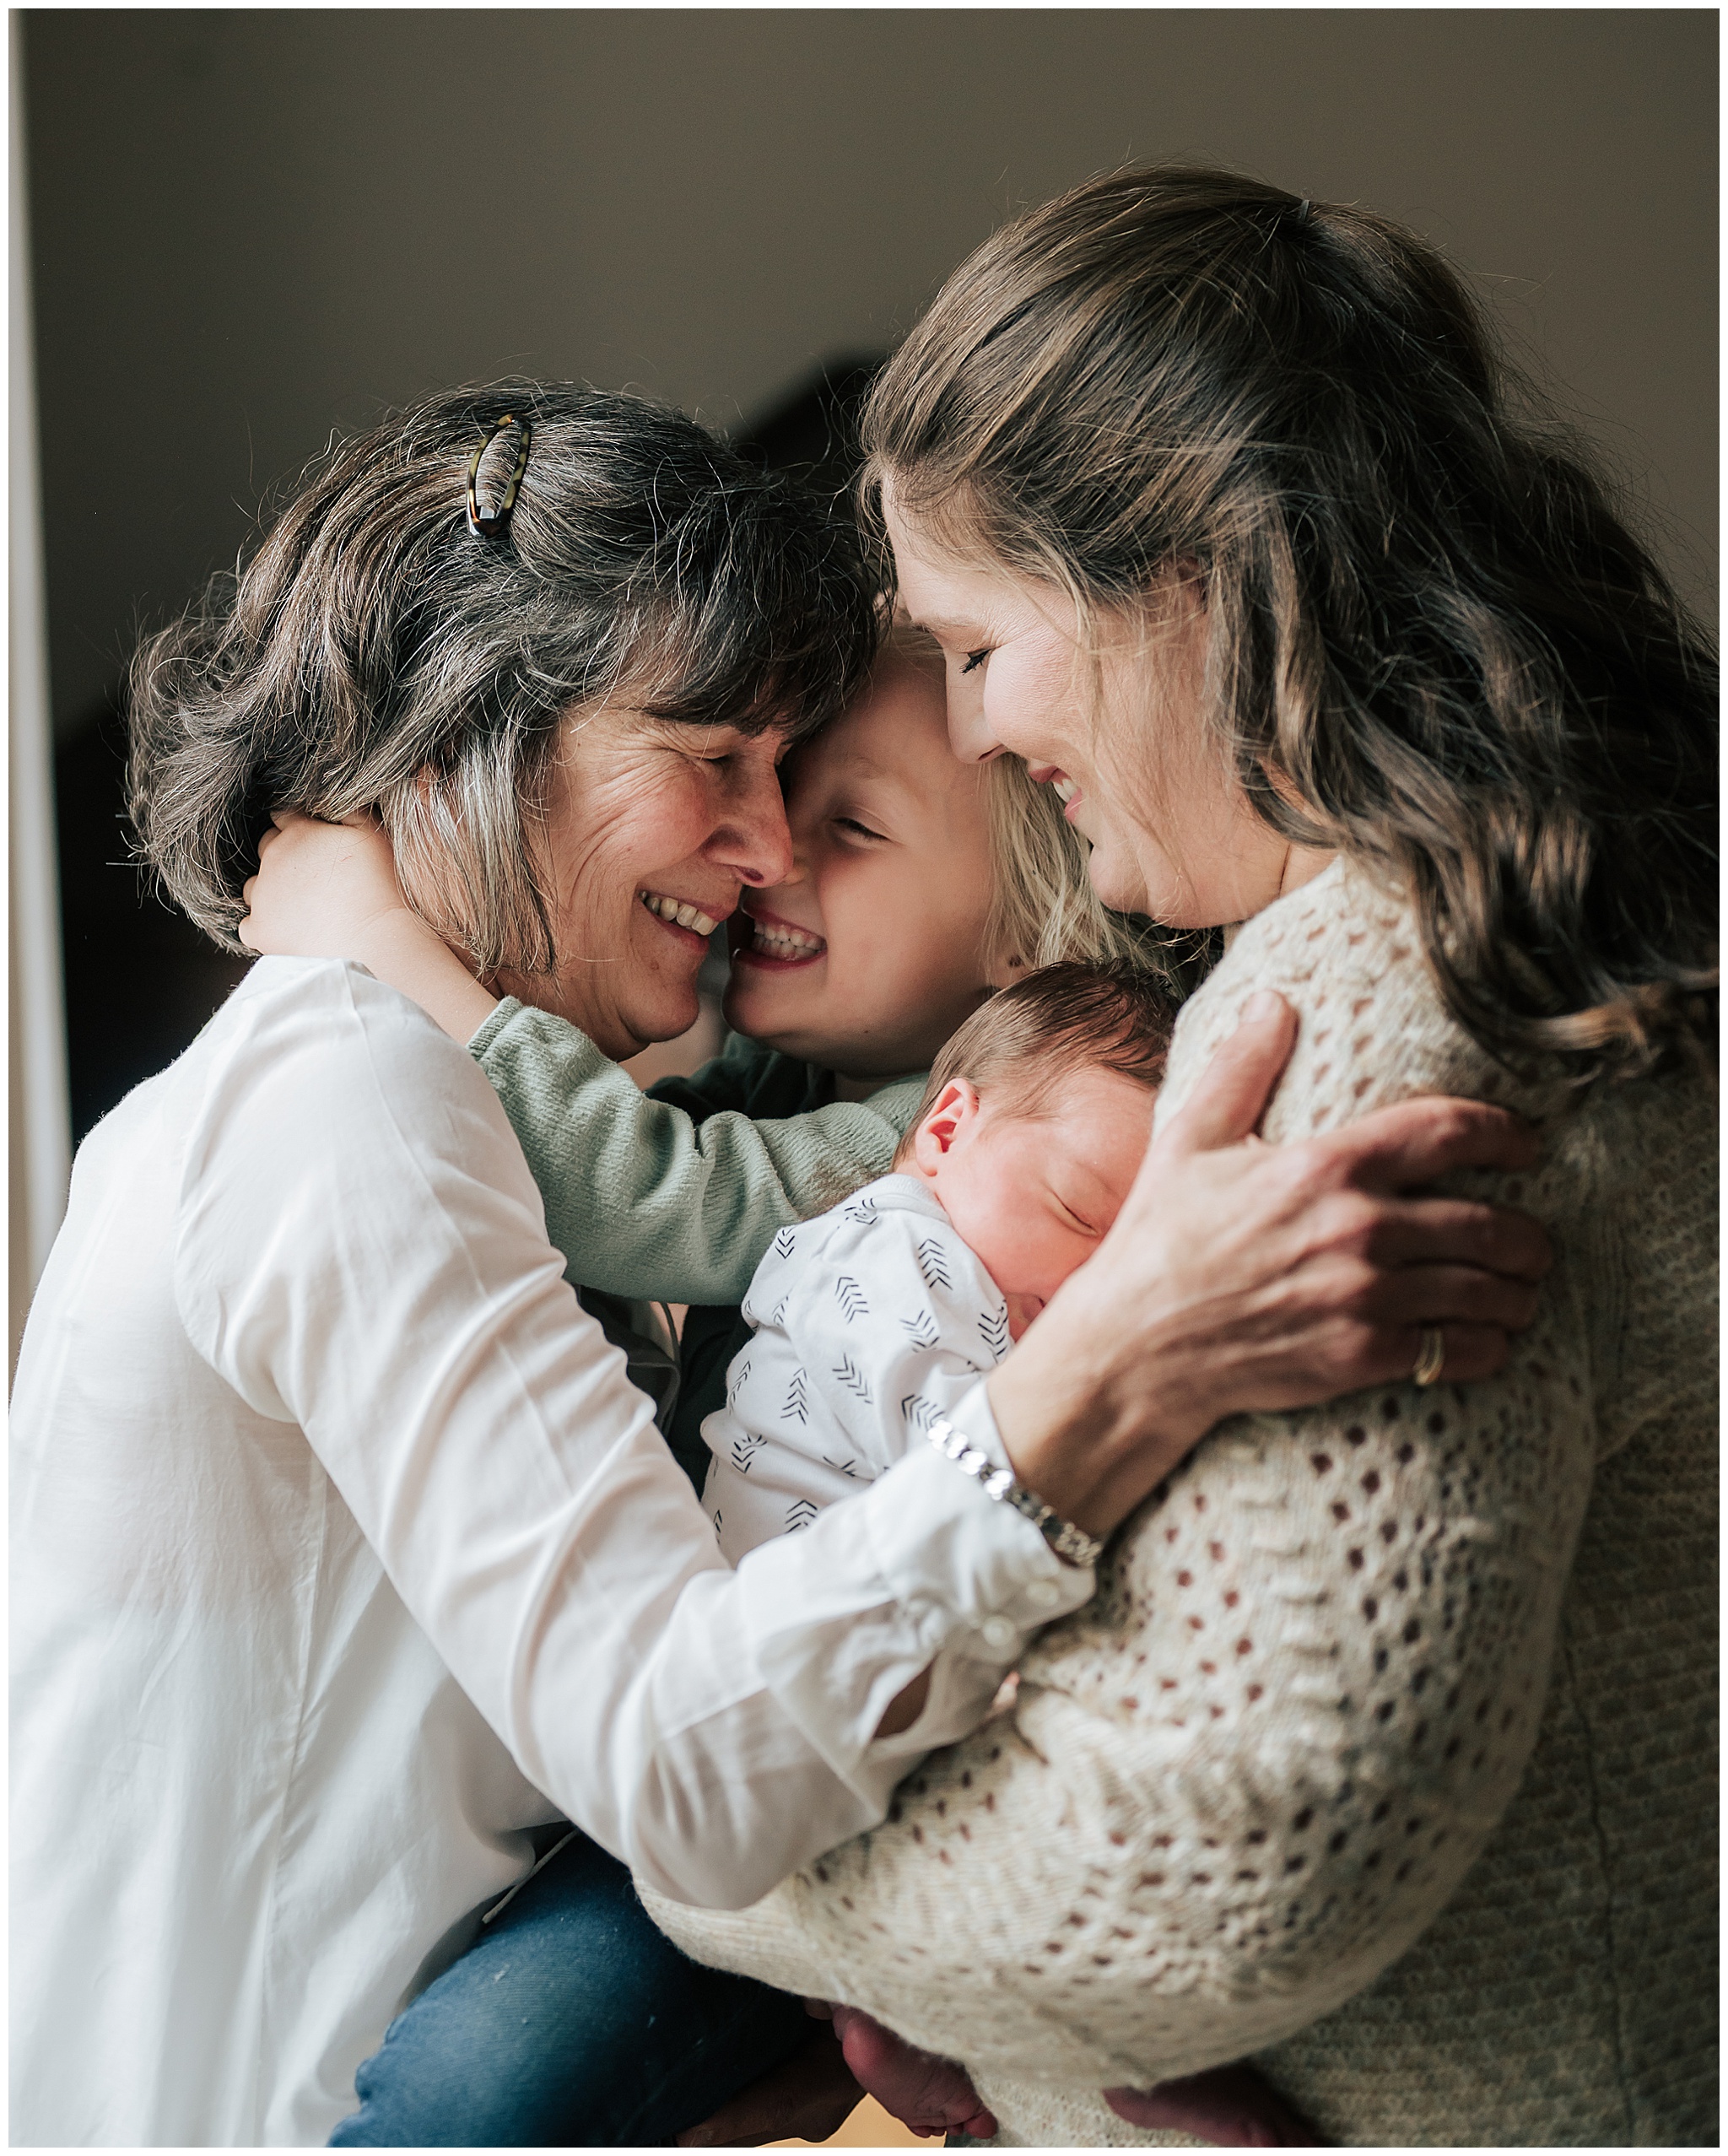 A professional photograph of a grandmother with her arms wrapped around her daughter and her two grandchildren. They are all smiling and happy.